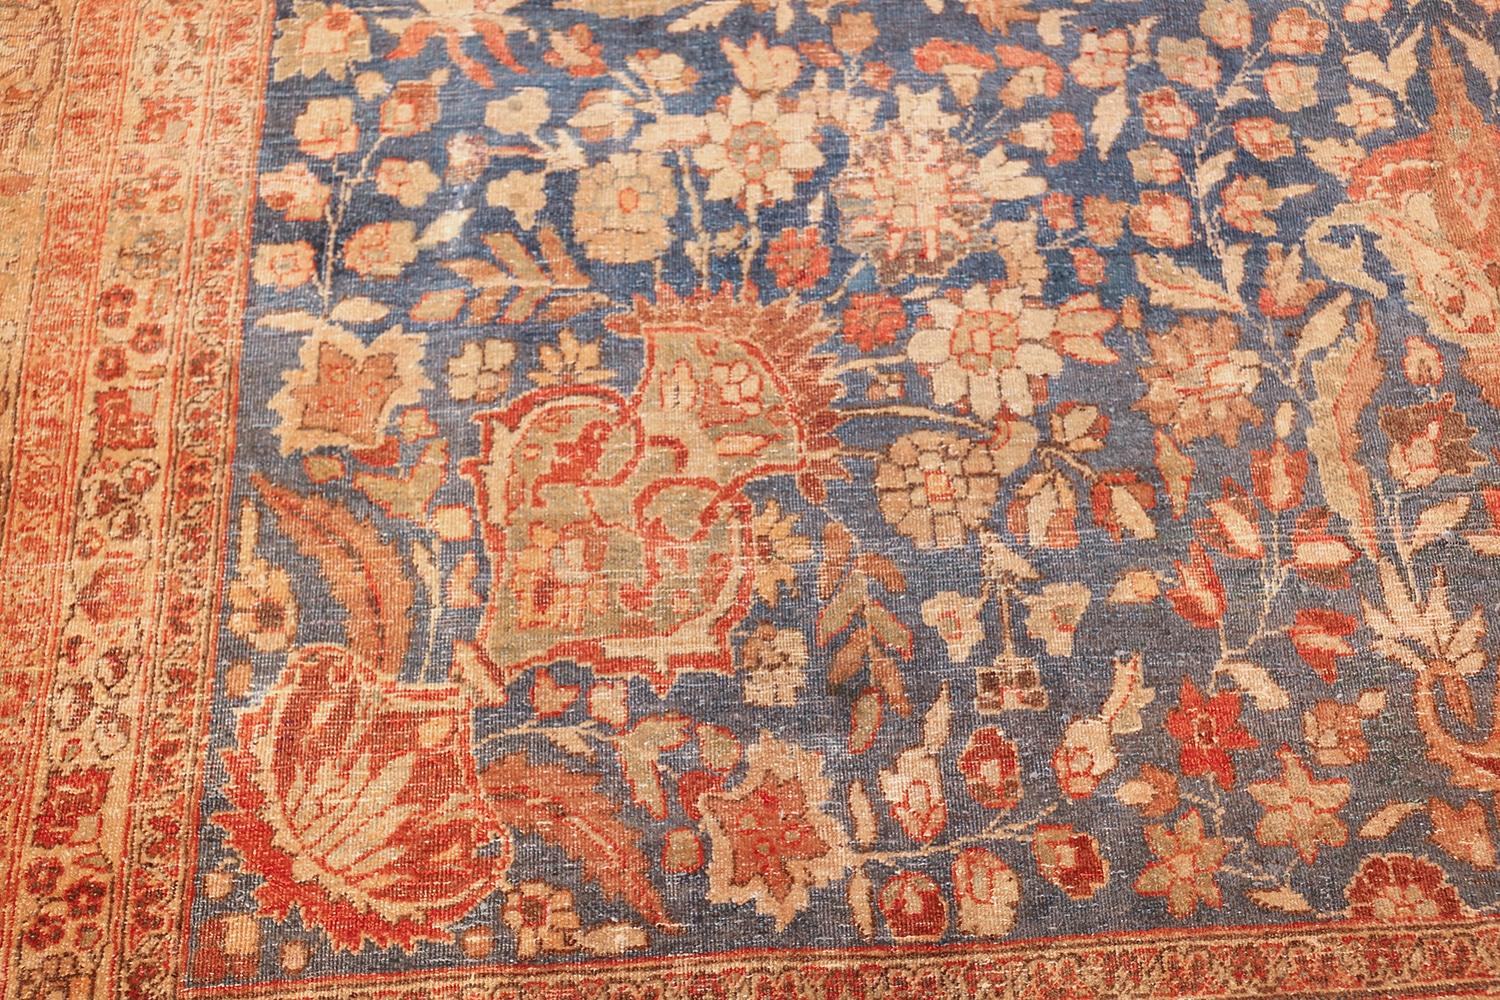 Wool Breathtaking Antique Room Size Blue and Rust Persian Khorassan Rug 10' x 14'6